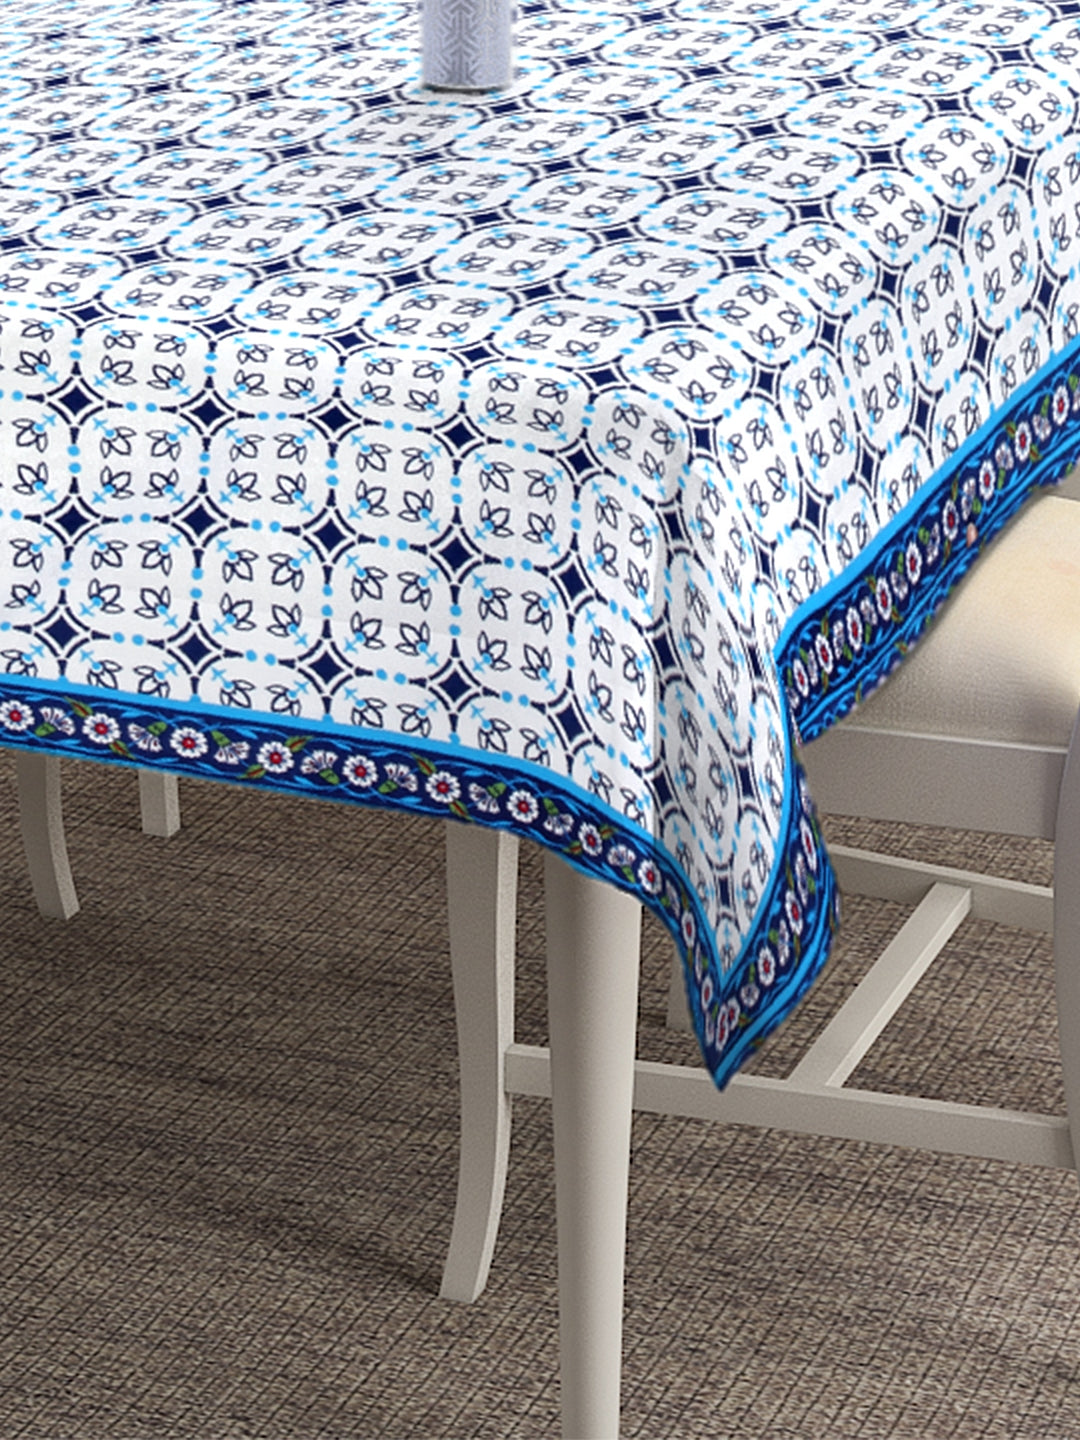 The Lotus Flower Printed Table Cloth